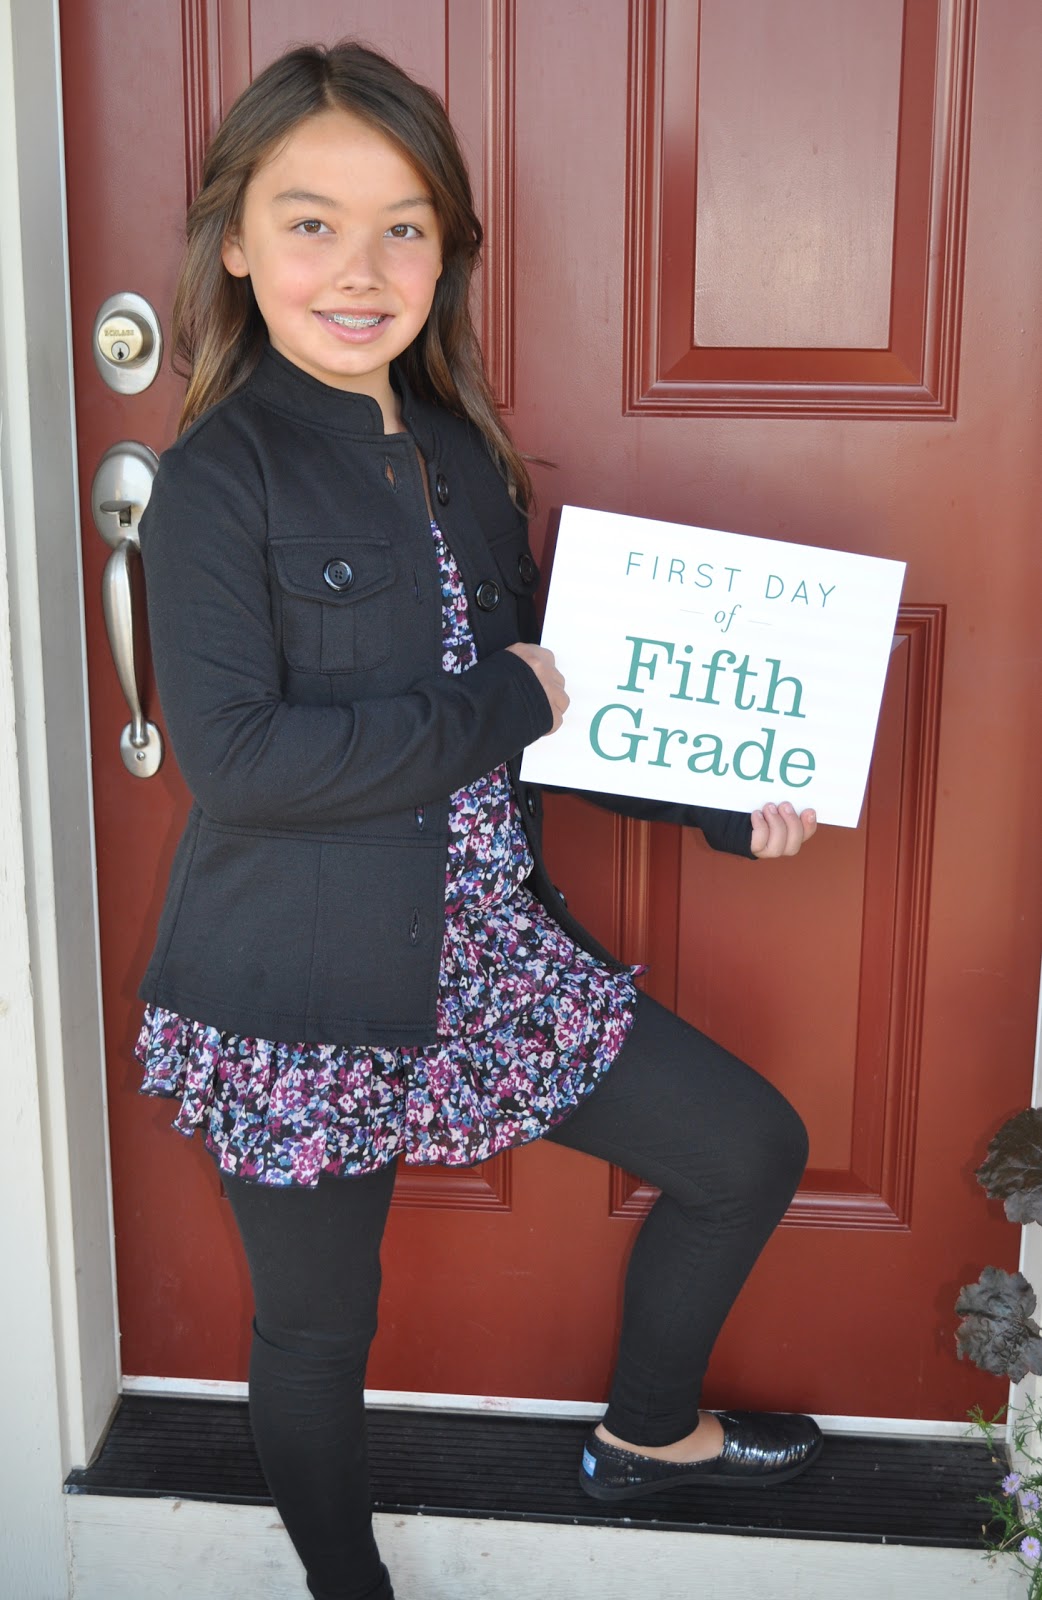 Stout Family Blog: First day of 5th grade